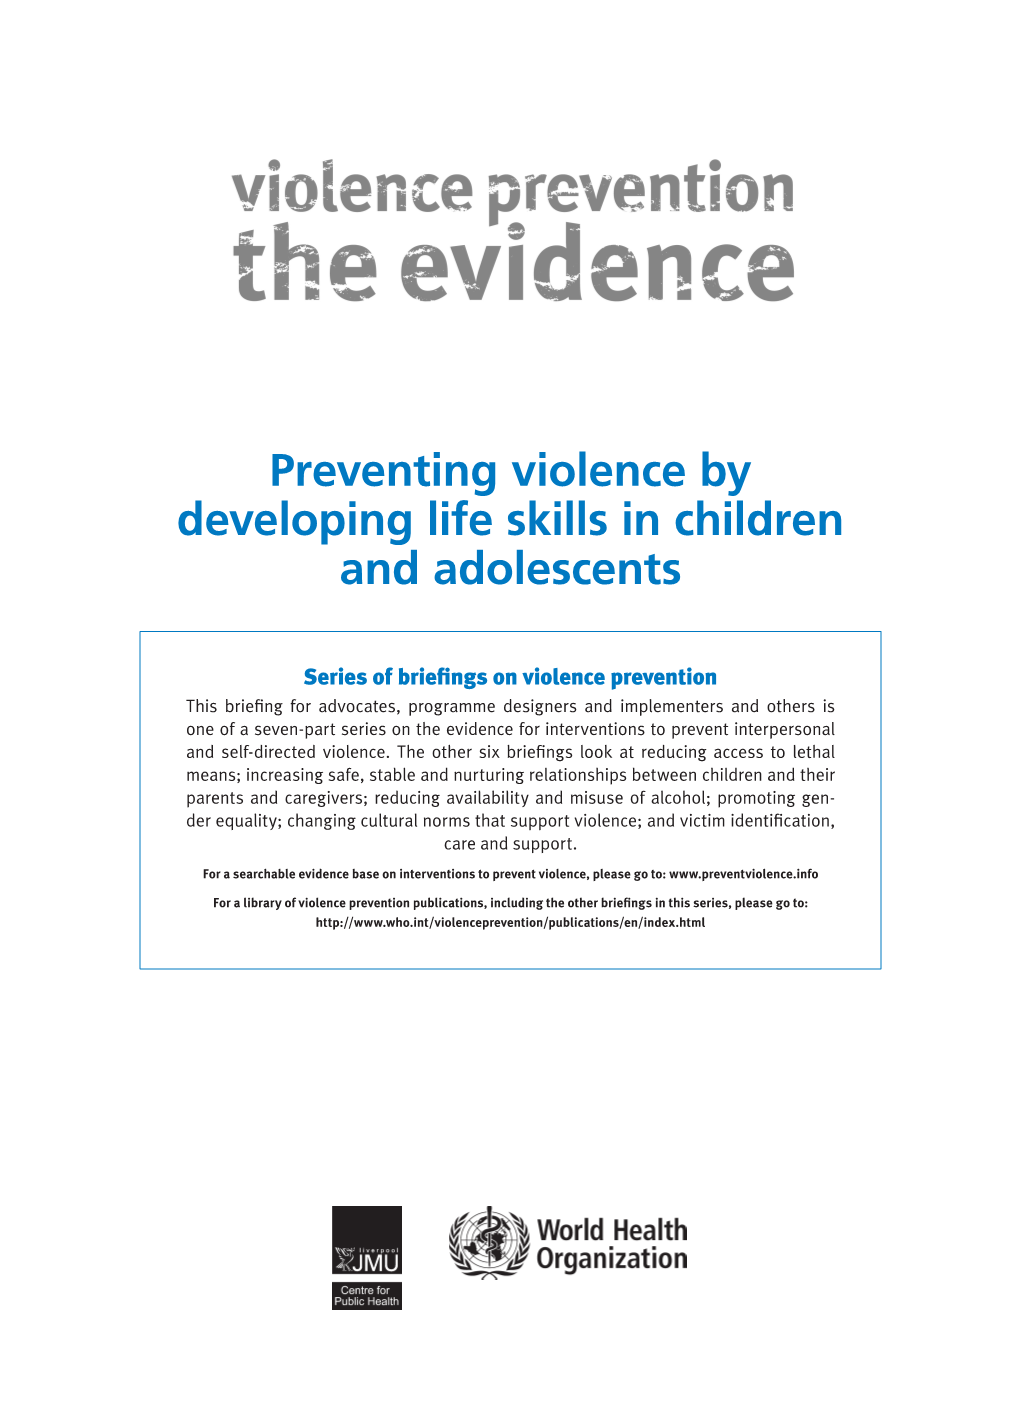 Preventing Violence by Developing Life Skills in Children and Adolescents